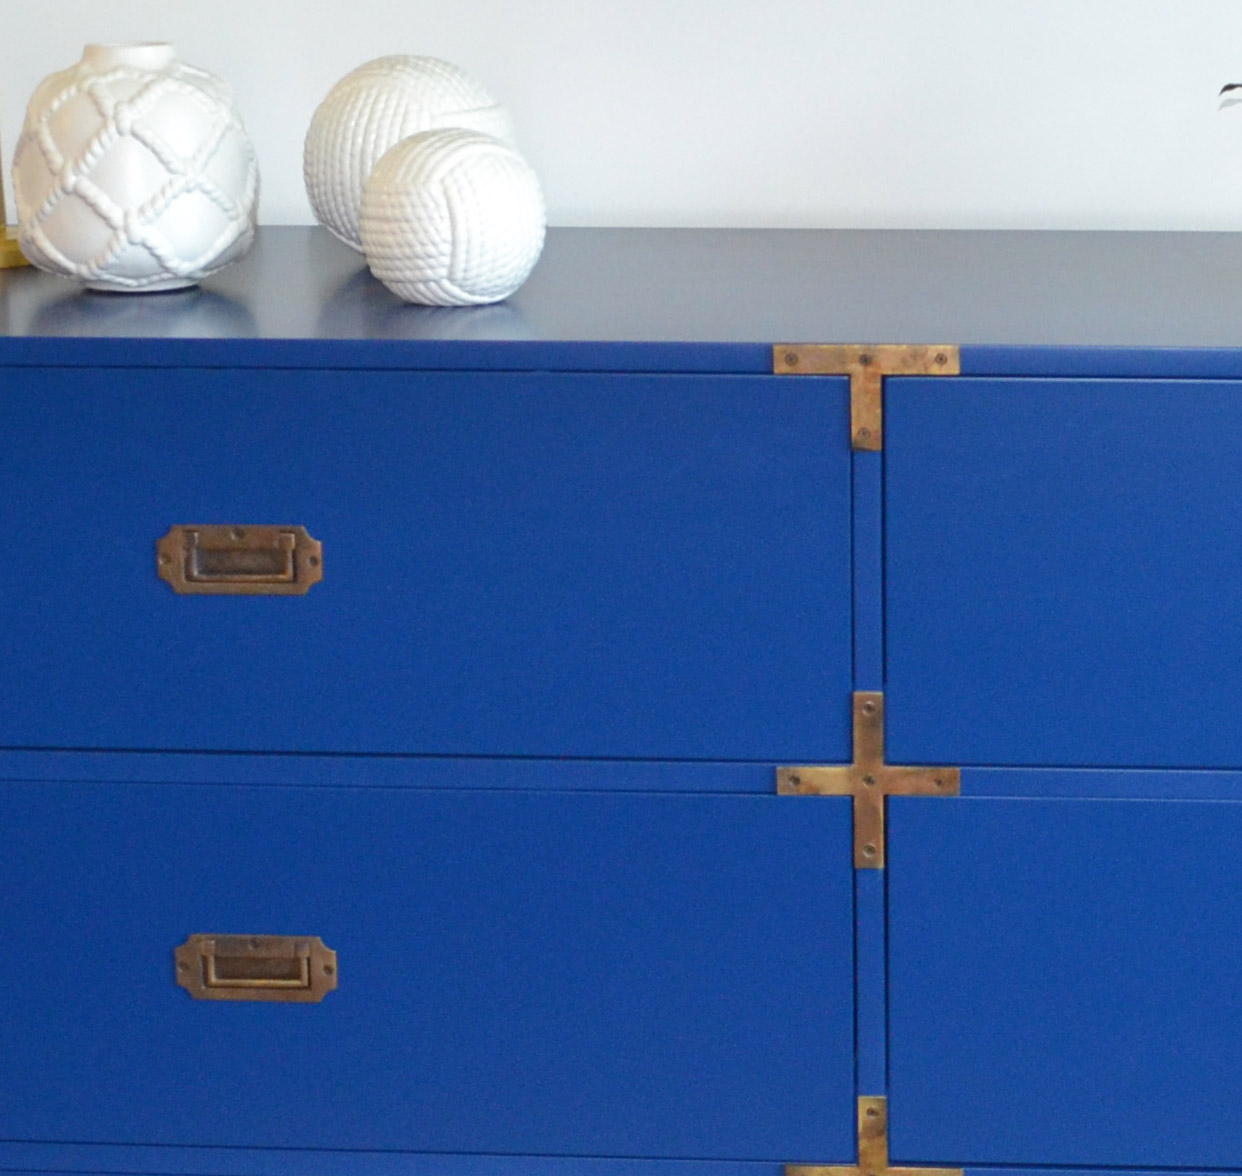 this blue dresser is a custom furniture designed by j banks design group in the Timbers Kiawah Ocean Club & Residences